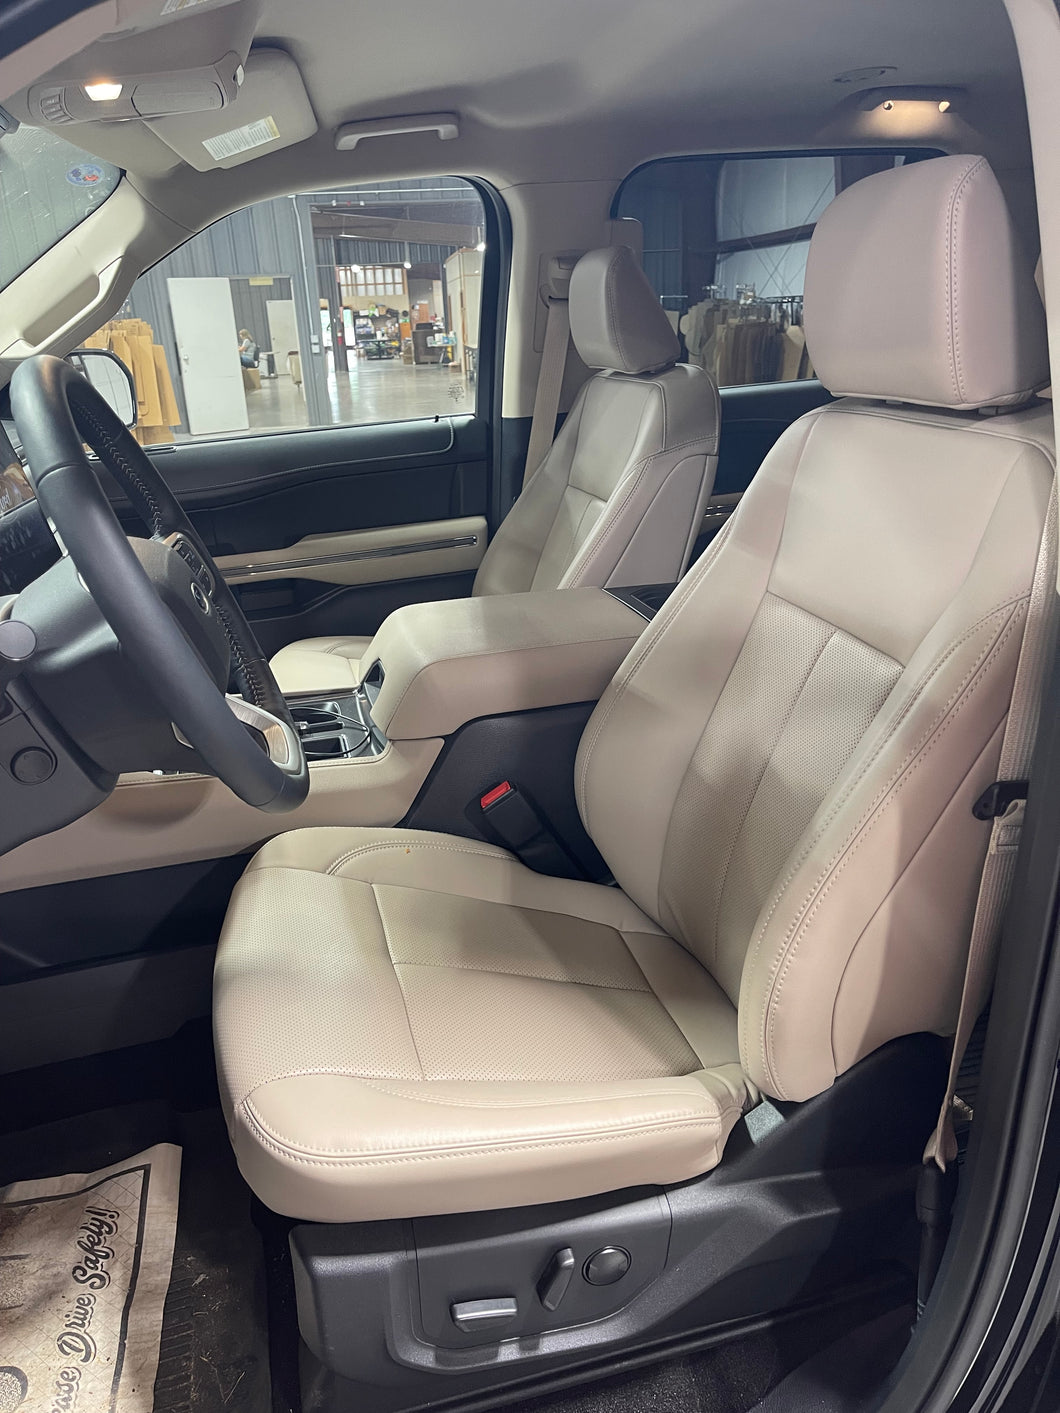 Ford Expedition Bucket Seats